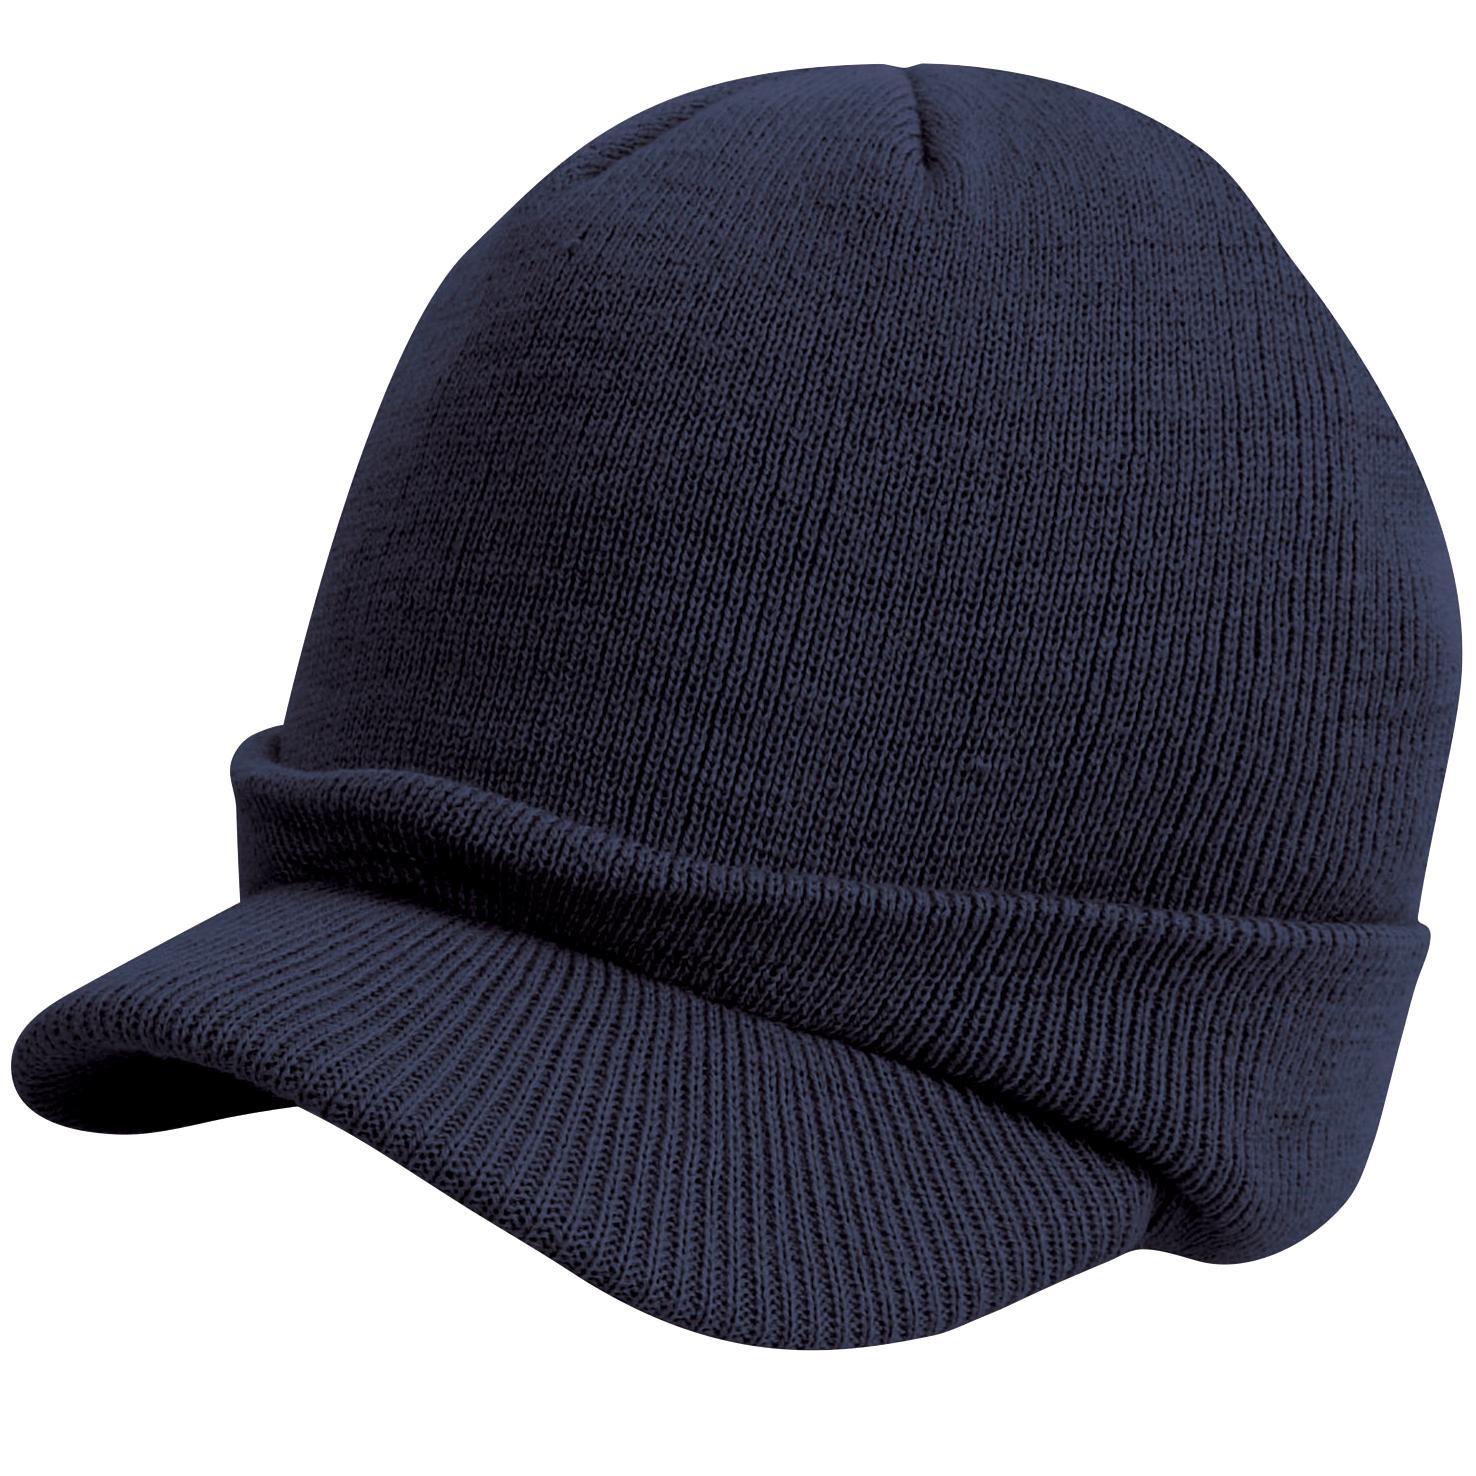 Result Unisex Esco Army Knitted Winter Hat (Navy Blue) (One Size)